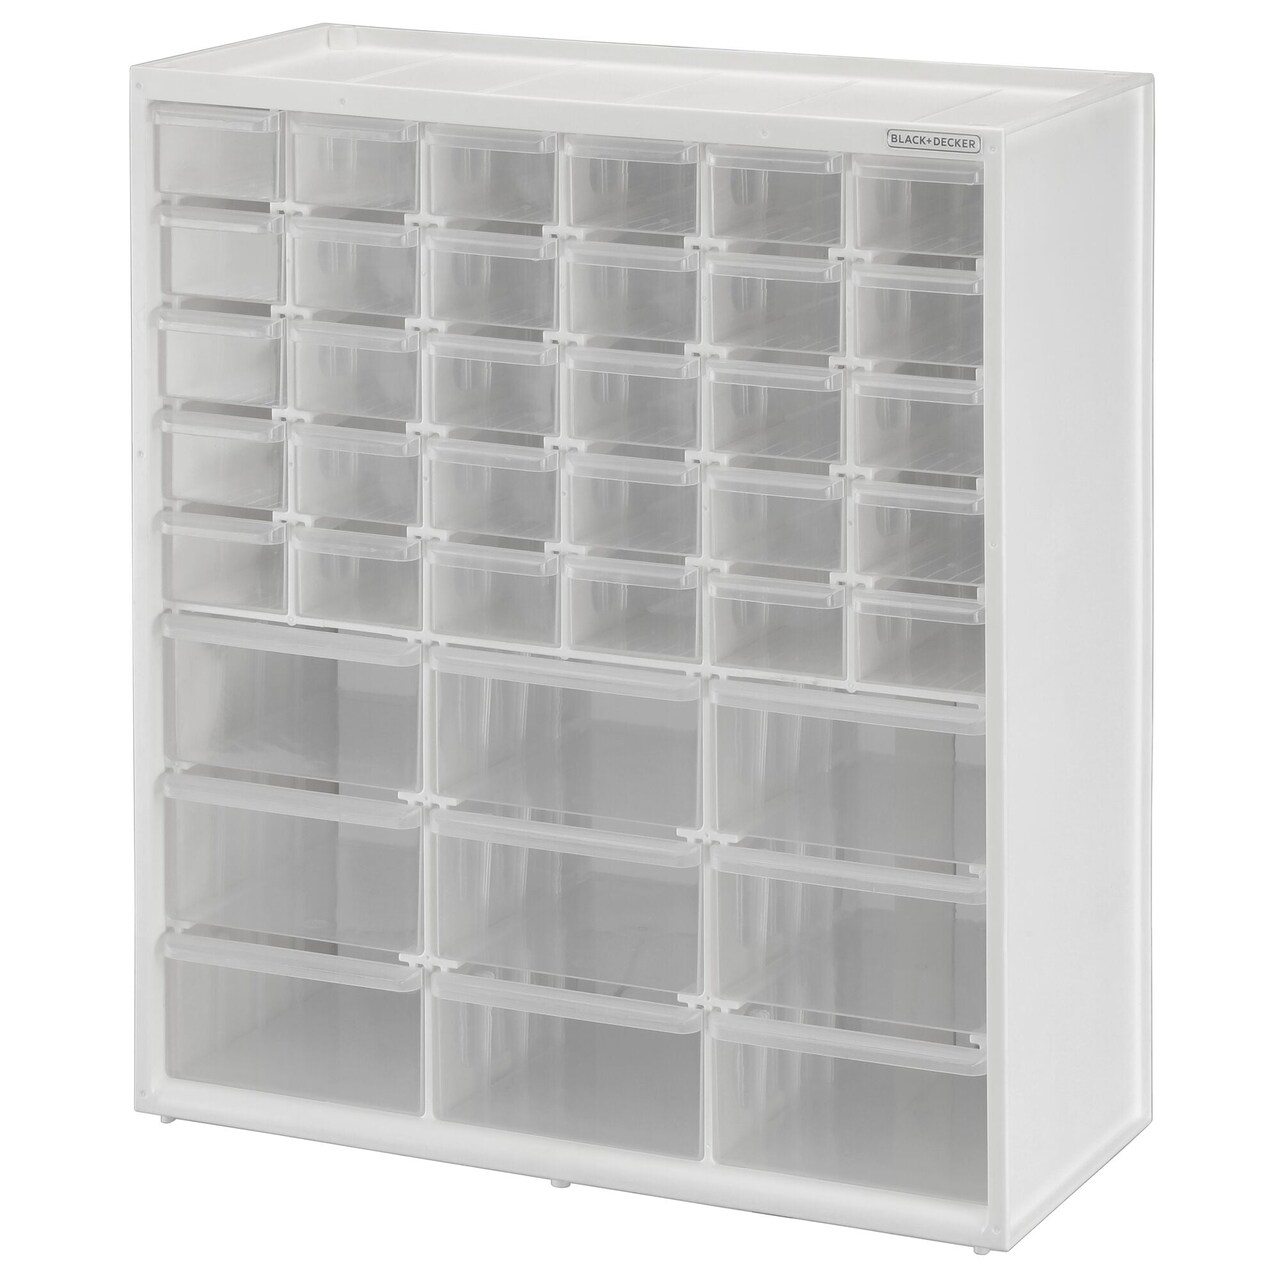 BLACK+DECKER Large & Small 39 Drawer Bin System (BDST40739FF), Clear, White